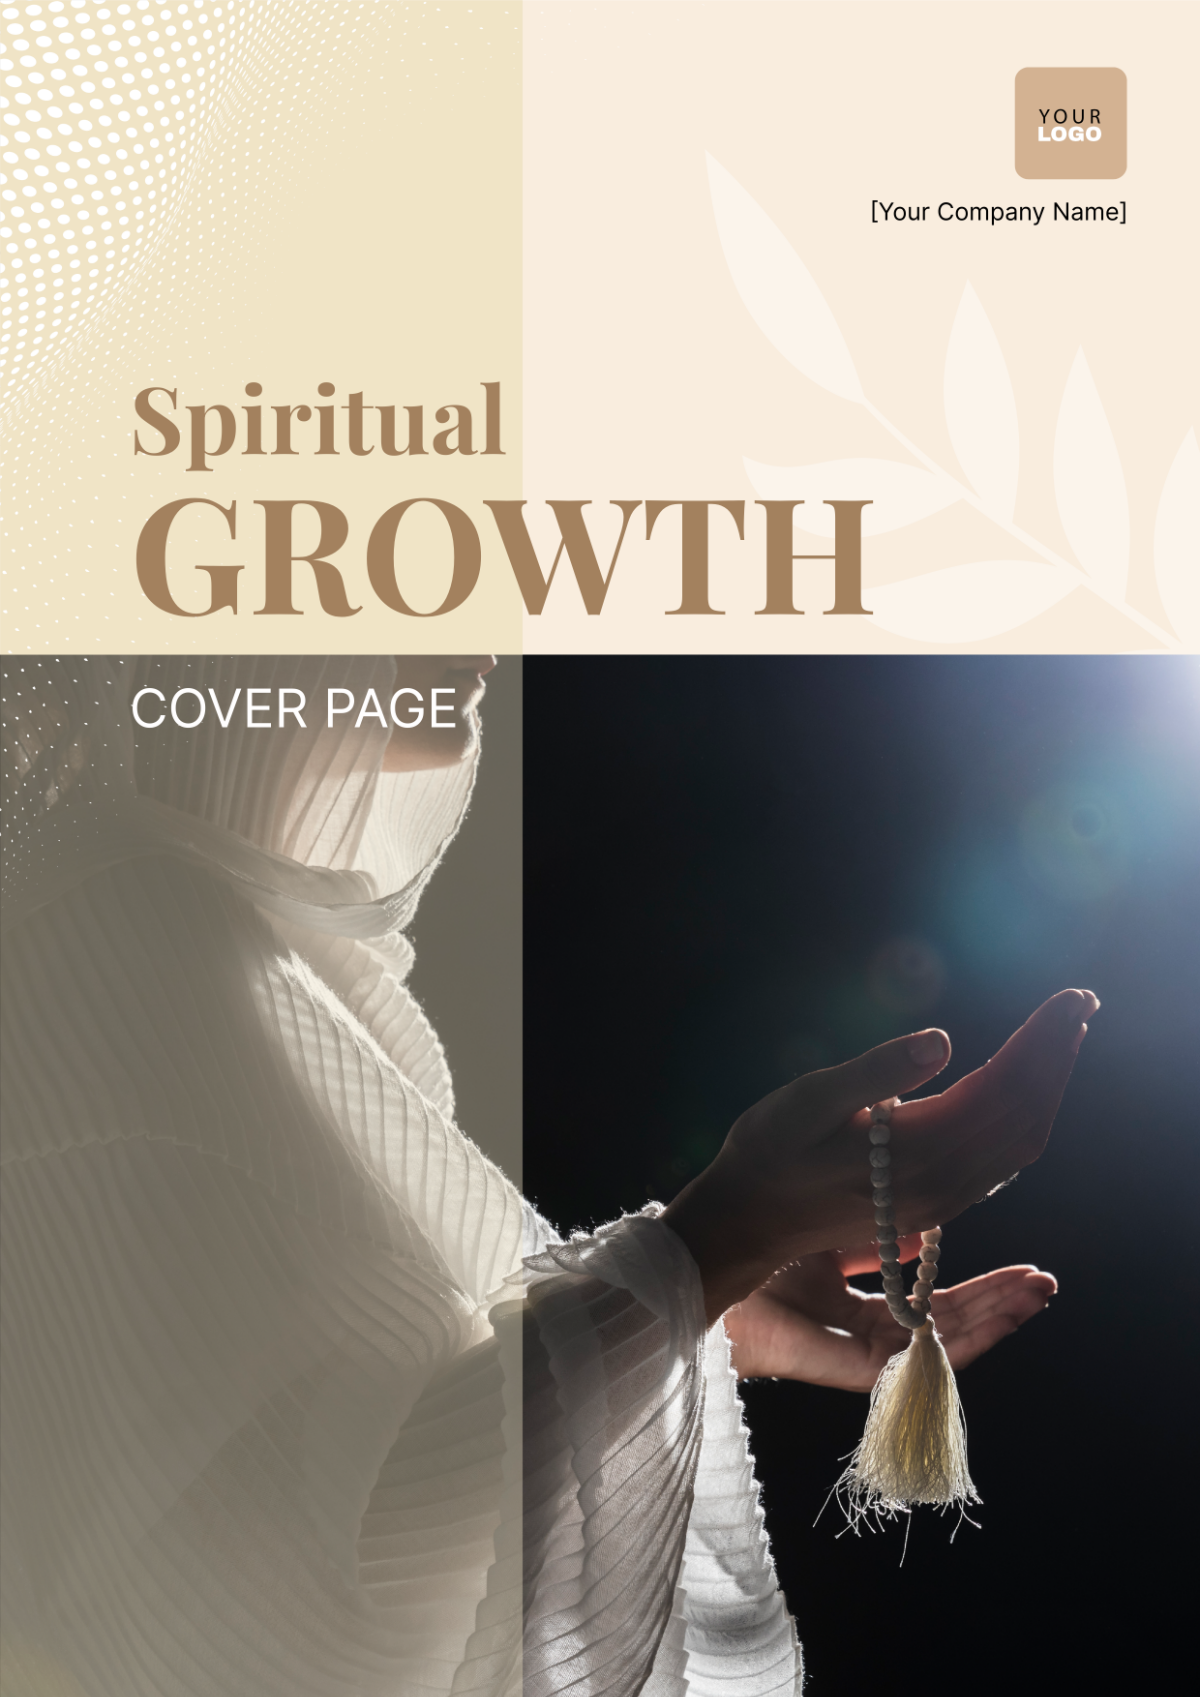 Spiritual Growth Cover Page Template